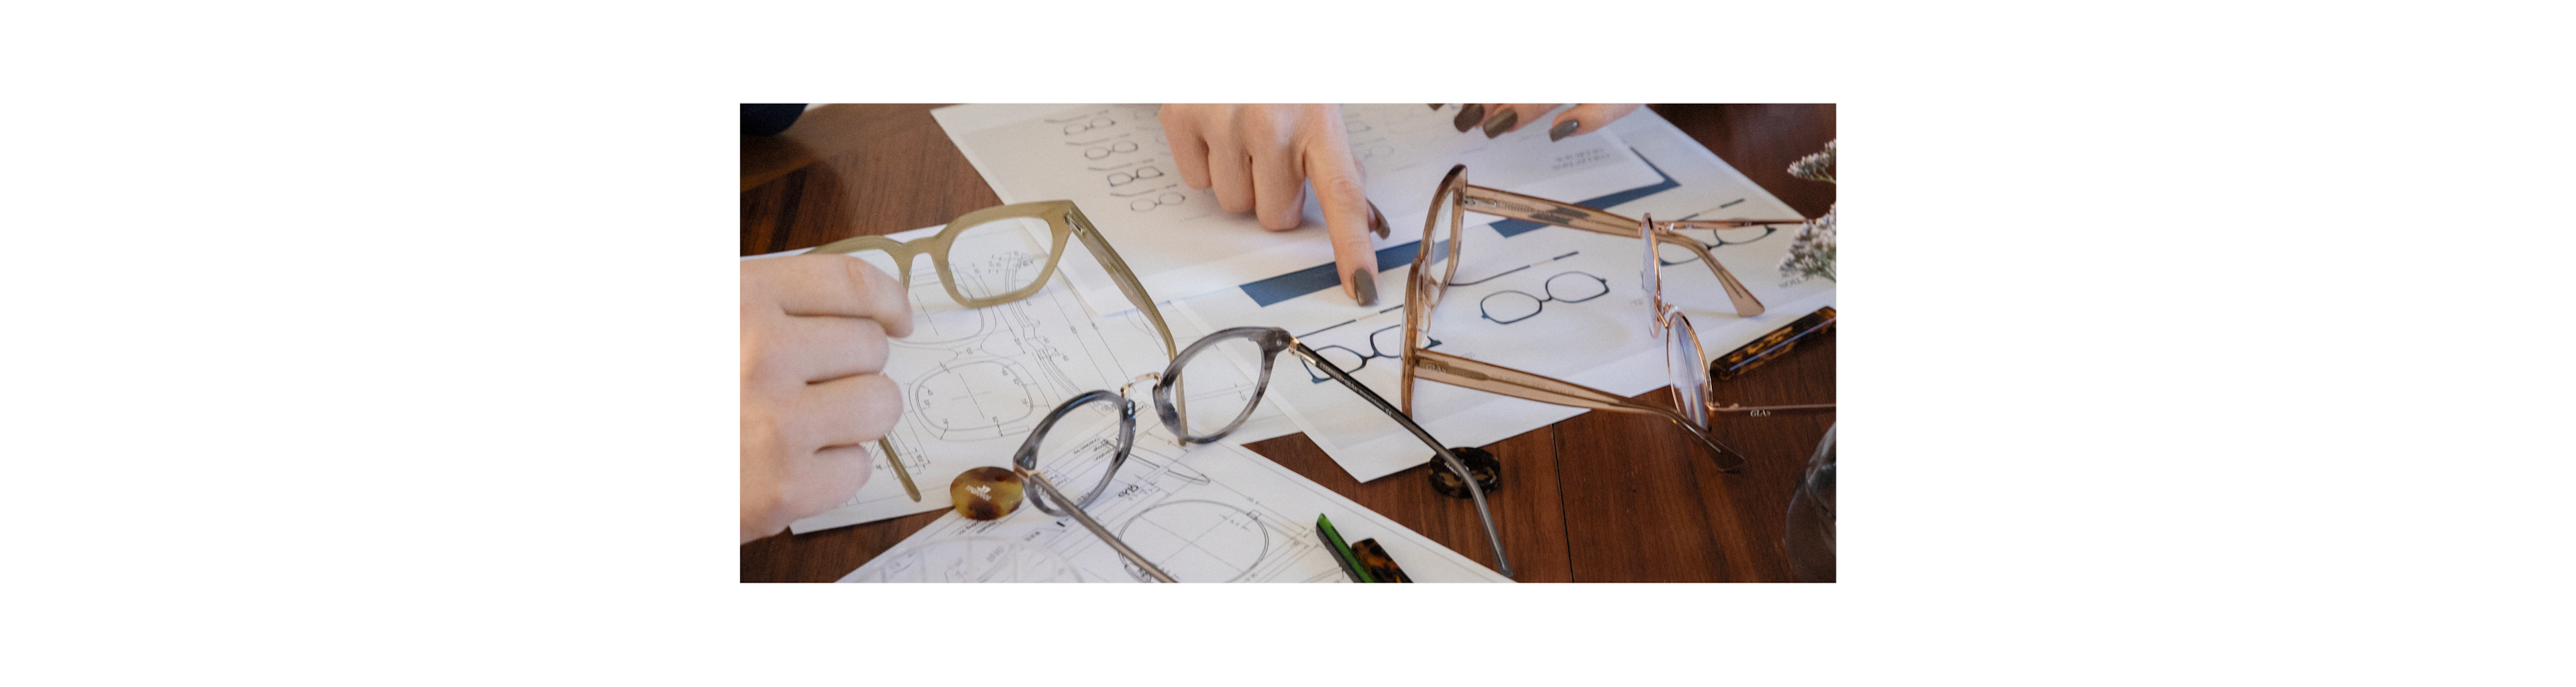 Reading glasses lying on a table surrounded by technical drawings and acetate samples